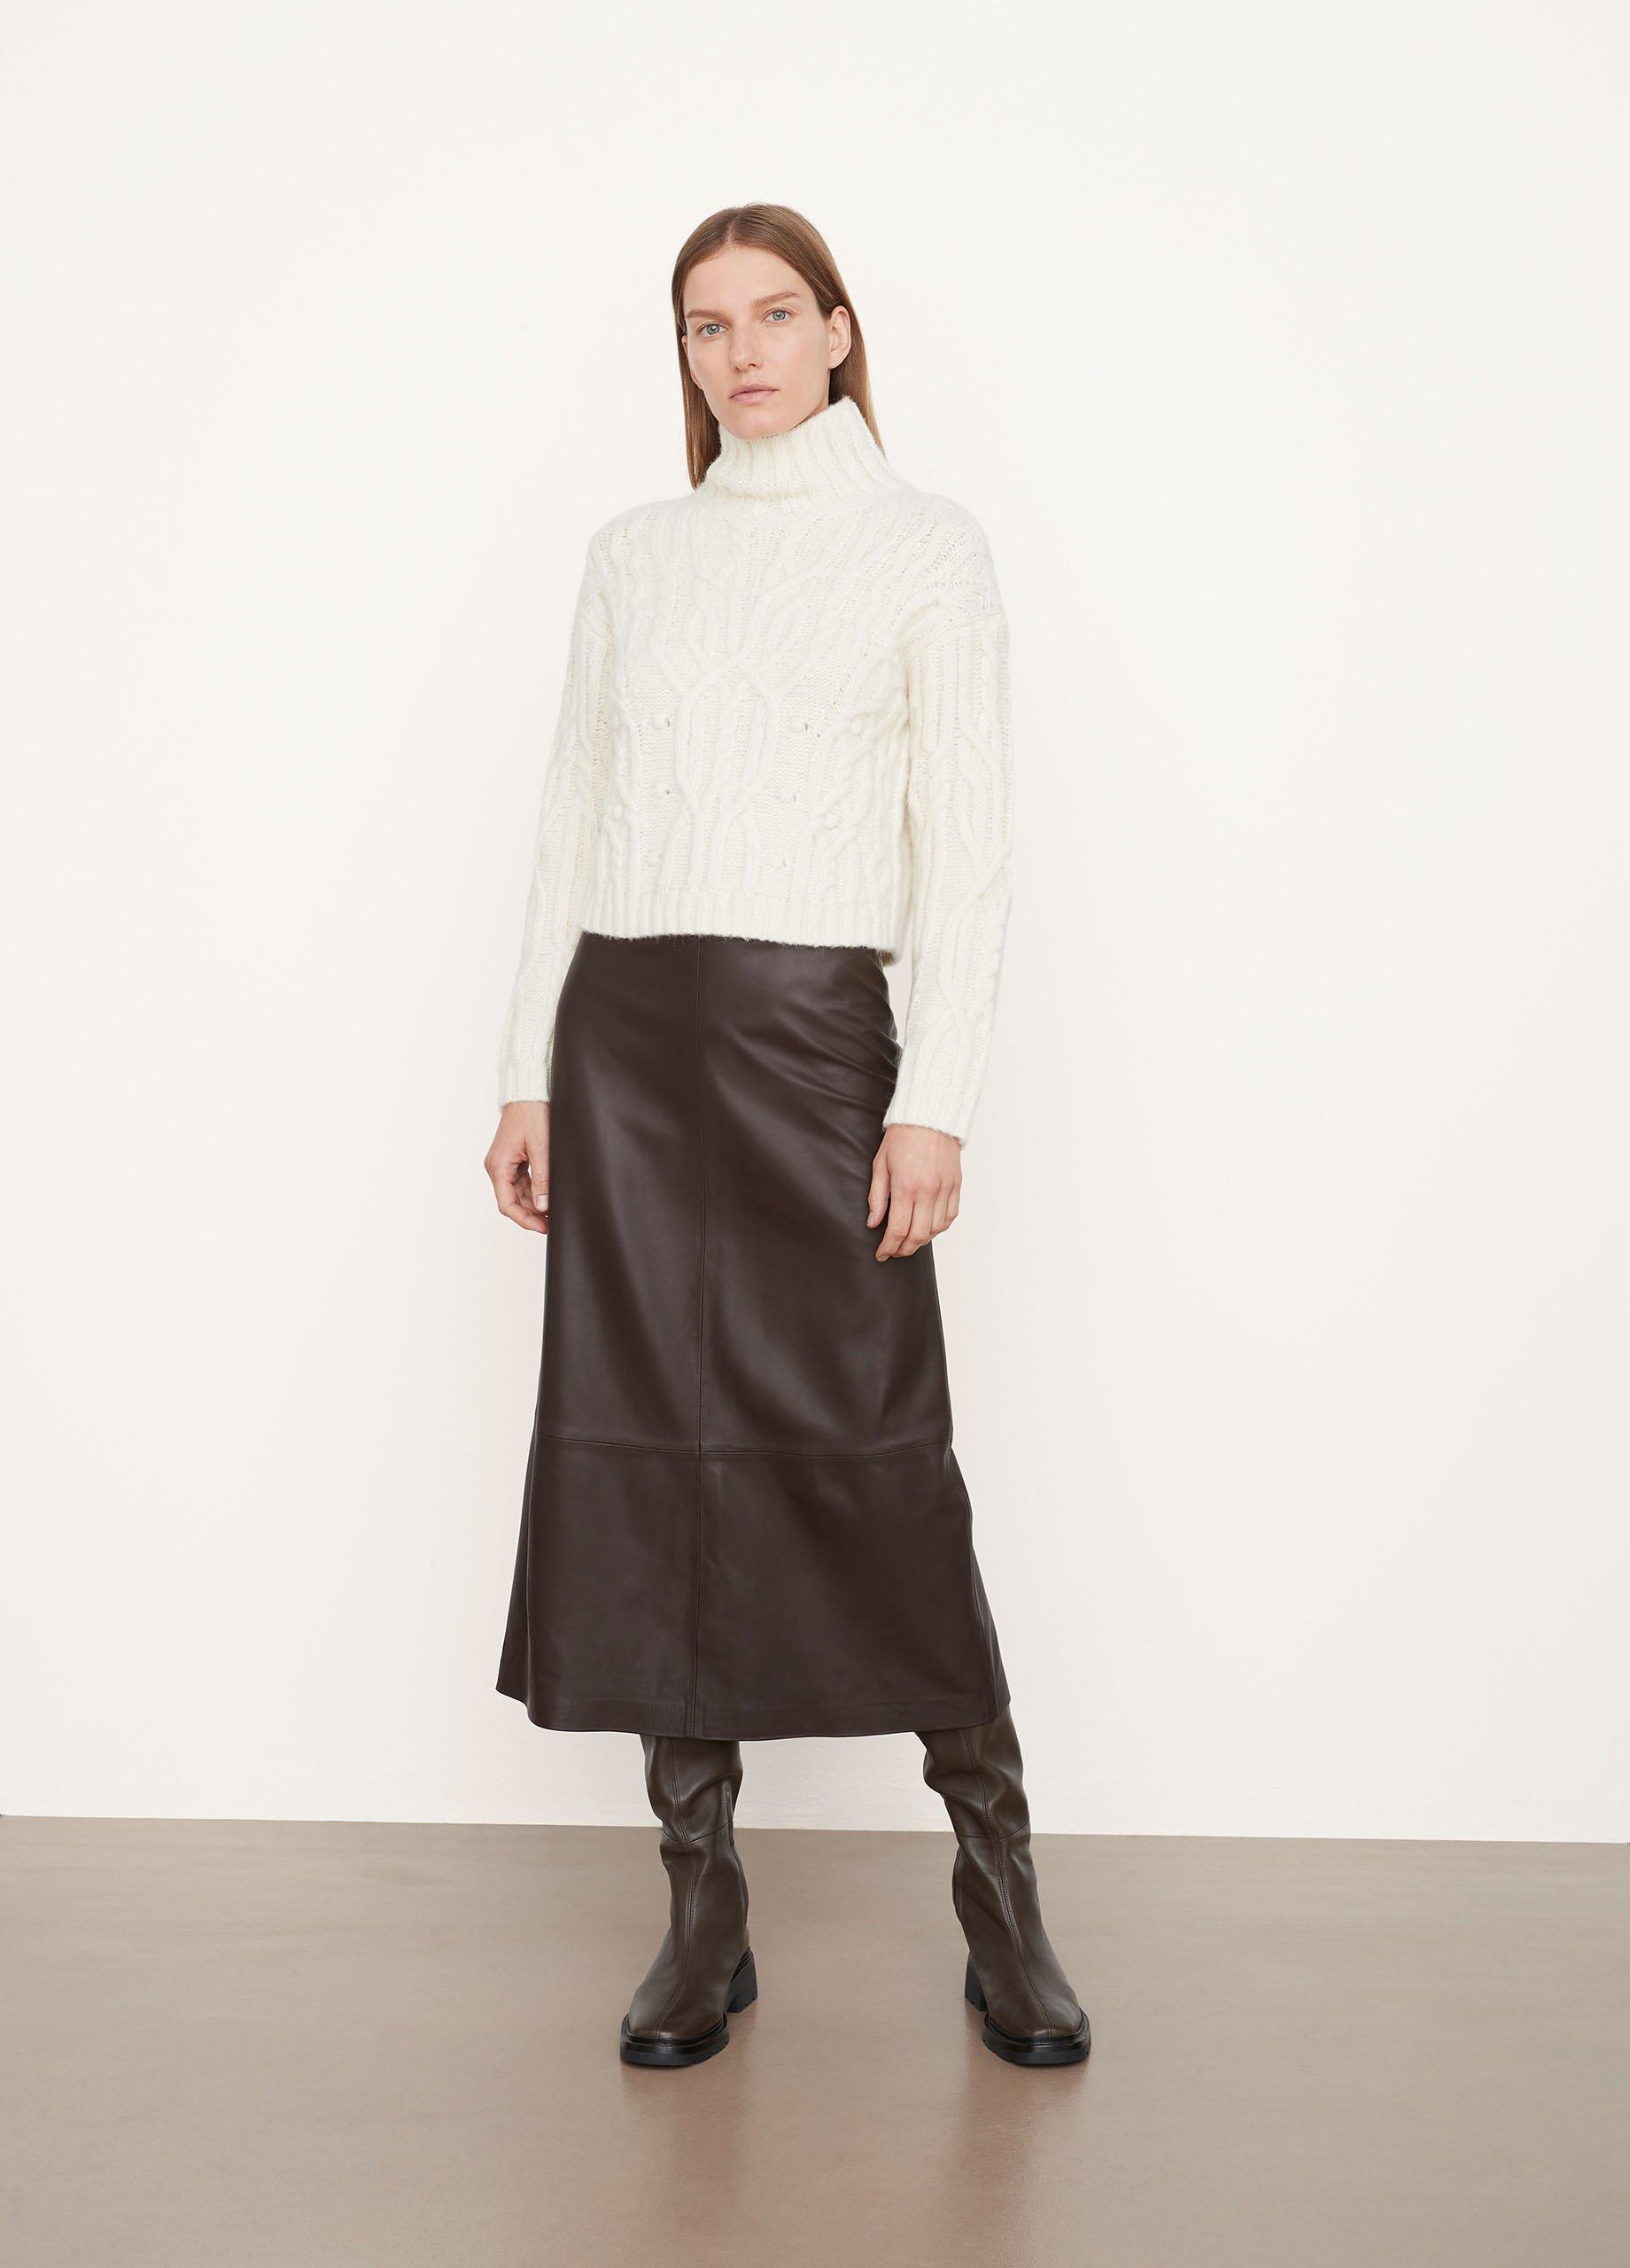 Interlaced Cable Turtleneck Sweater in Sweaters | Vince